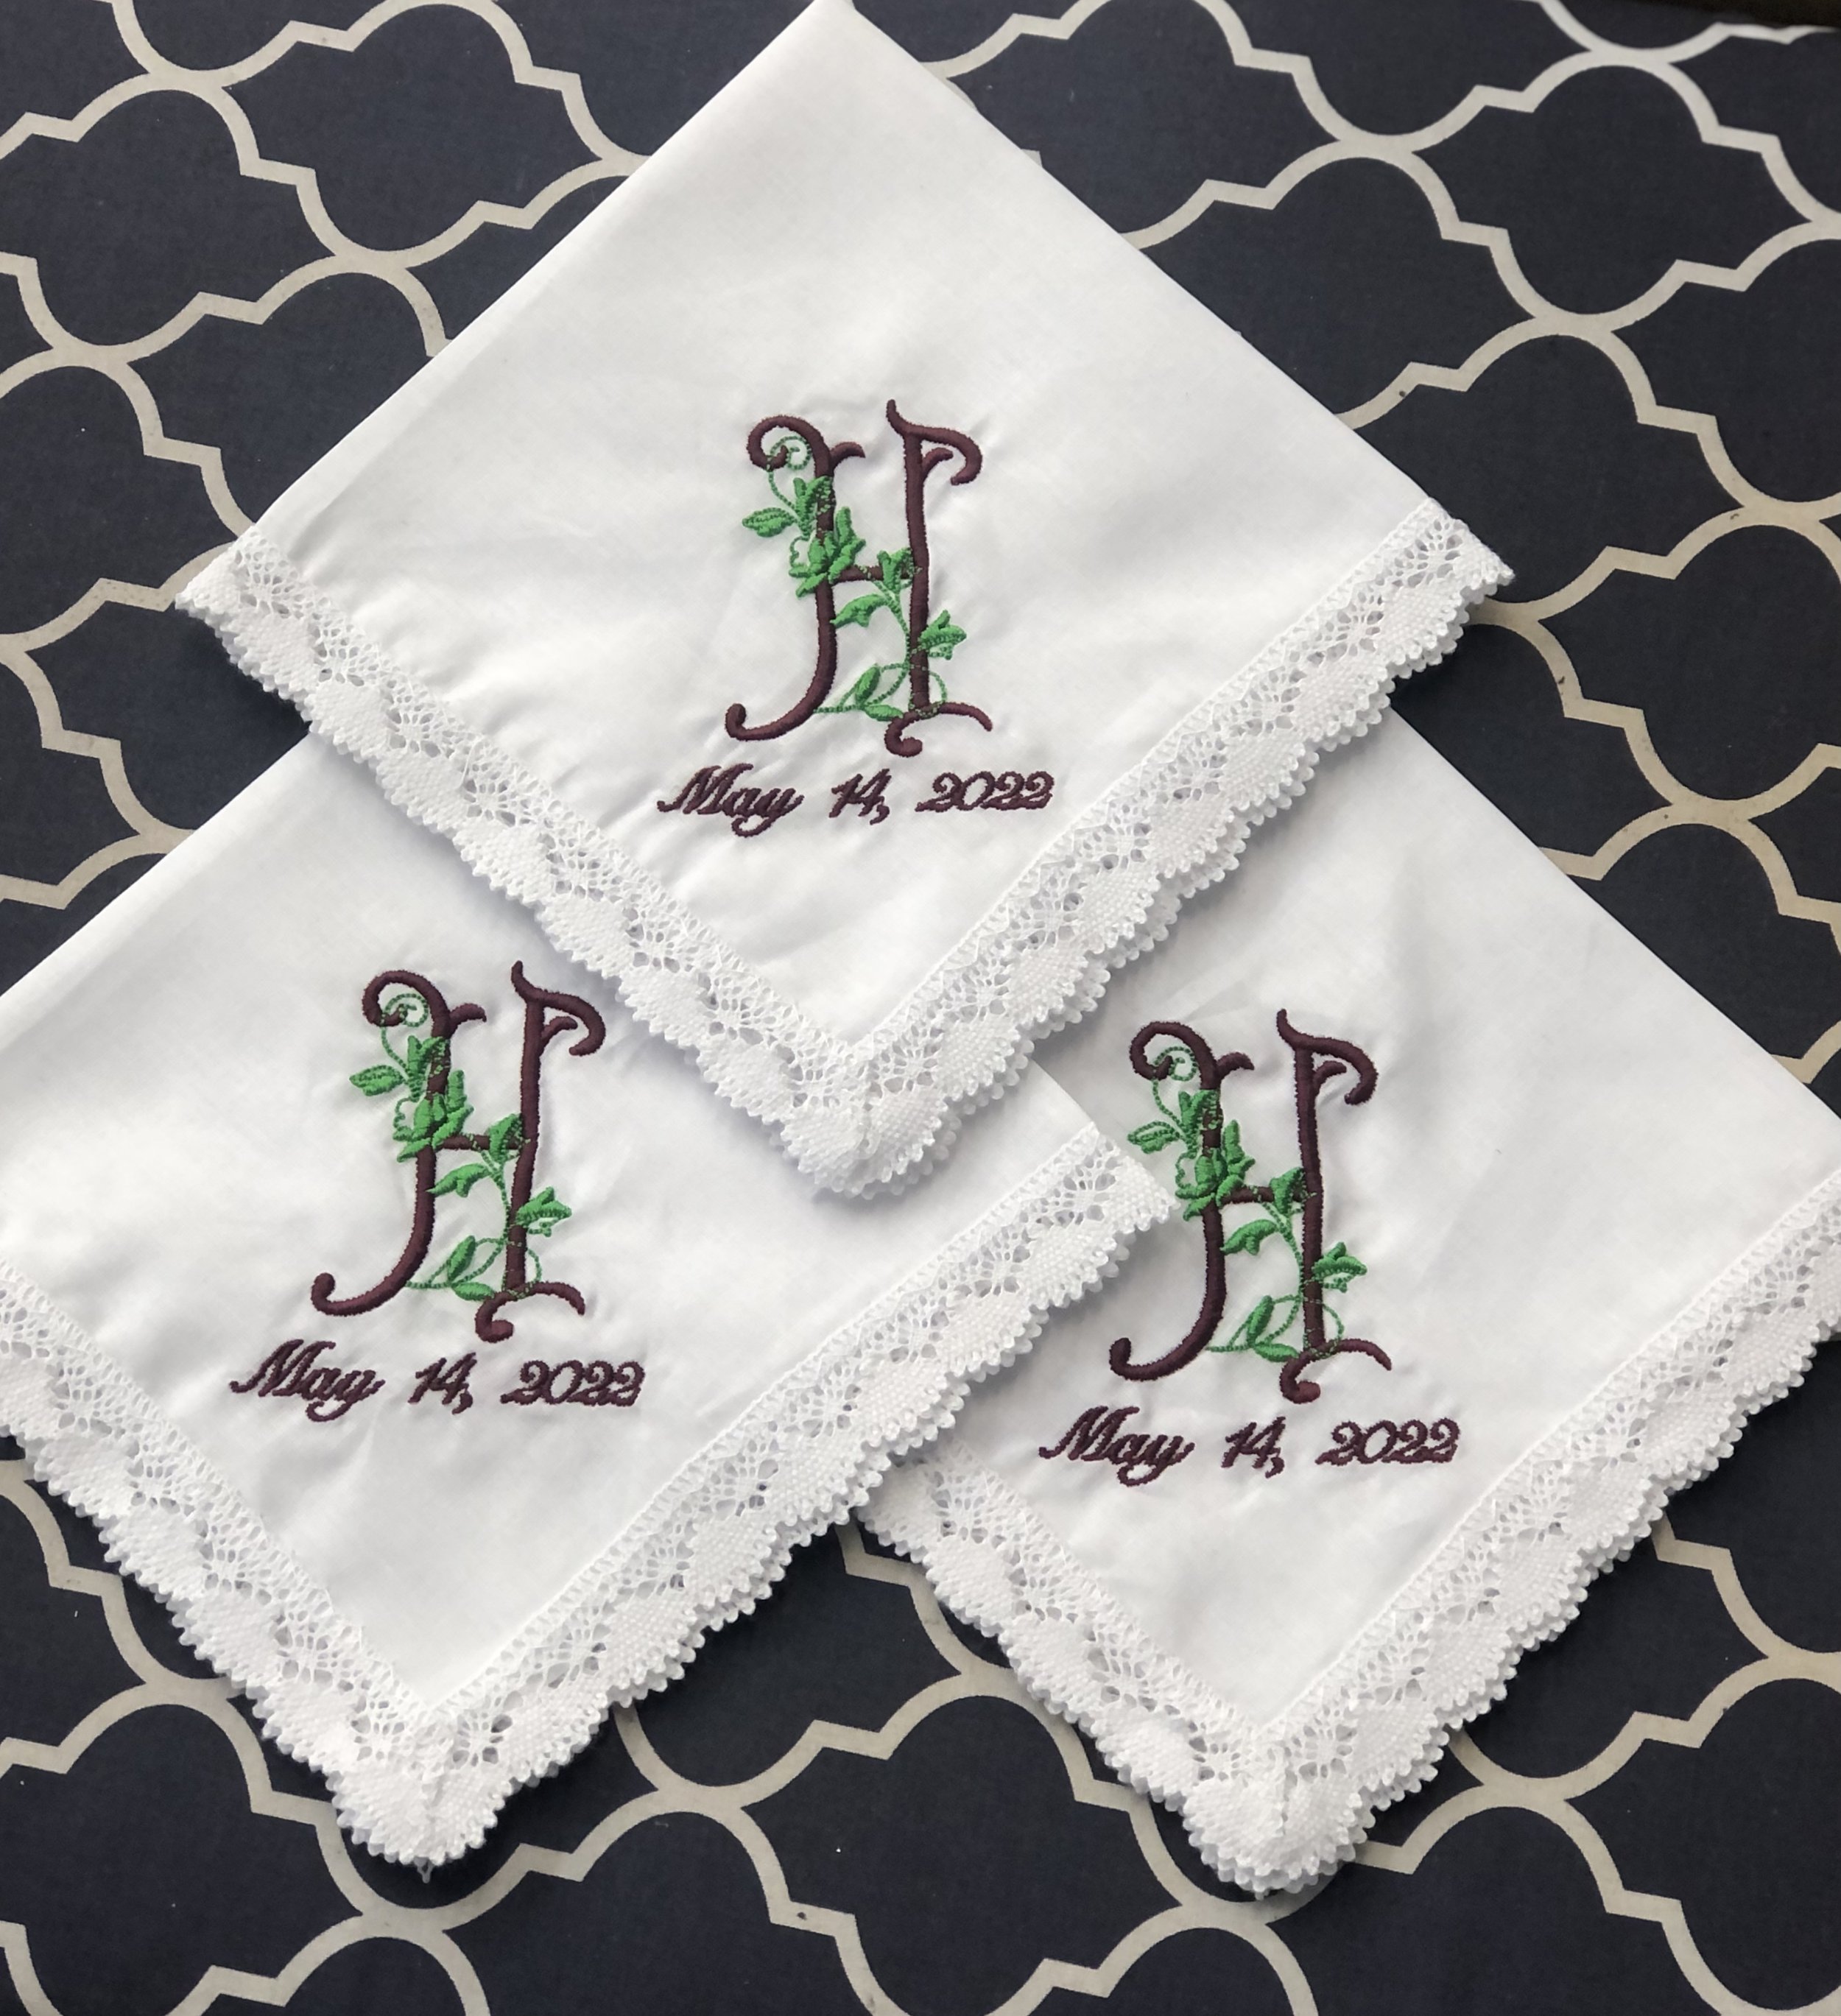 Cloth-napkins-with-embroidery- for-wedding-anniversary-celebration.jpg